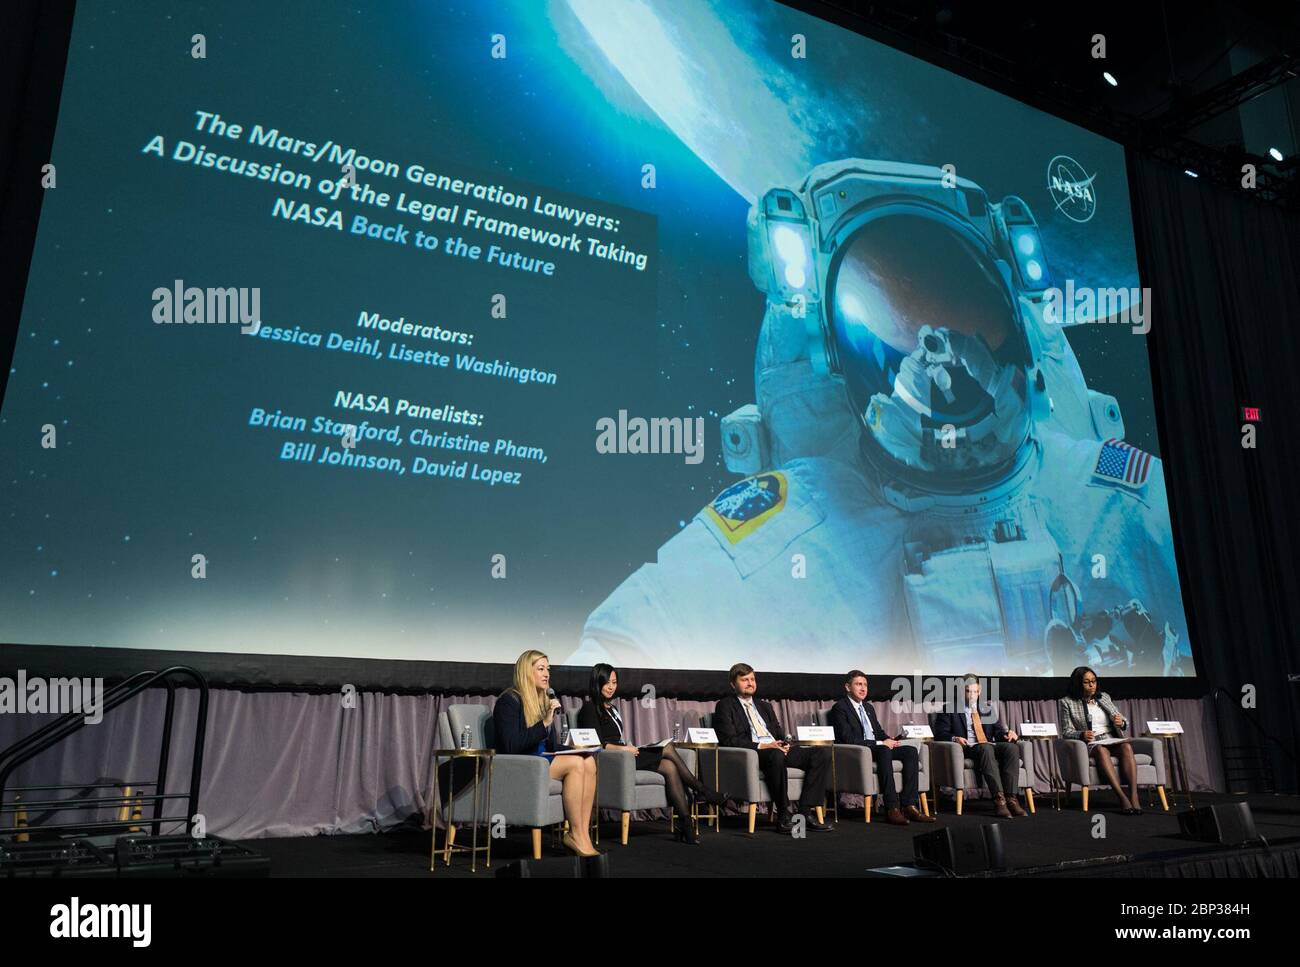 70th International Astronautical Congress  Jessica Deihl, an attorney at NASA’s Goddard Space Flight Center, left, Christine Pham, an attorney at NASA Headquarters, Bill Johnson, an attorney at NASA’s Glenn Research Center, David Lopez, an attorney at NASA Headquarters, Brian Stanford an attorney at NASA Headquarters, and Lisette Washington an attorney at NASA Headquarters, are seen during a “The Moon/Mars Generation Lawyers: A Discussion of the Legal Framework Taking NASA Back to the Future” at the 70th International Astronautical Congress, Thursday, Oct. 24, 2019, at the Walter E. Washington Stock Photo